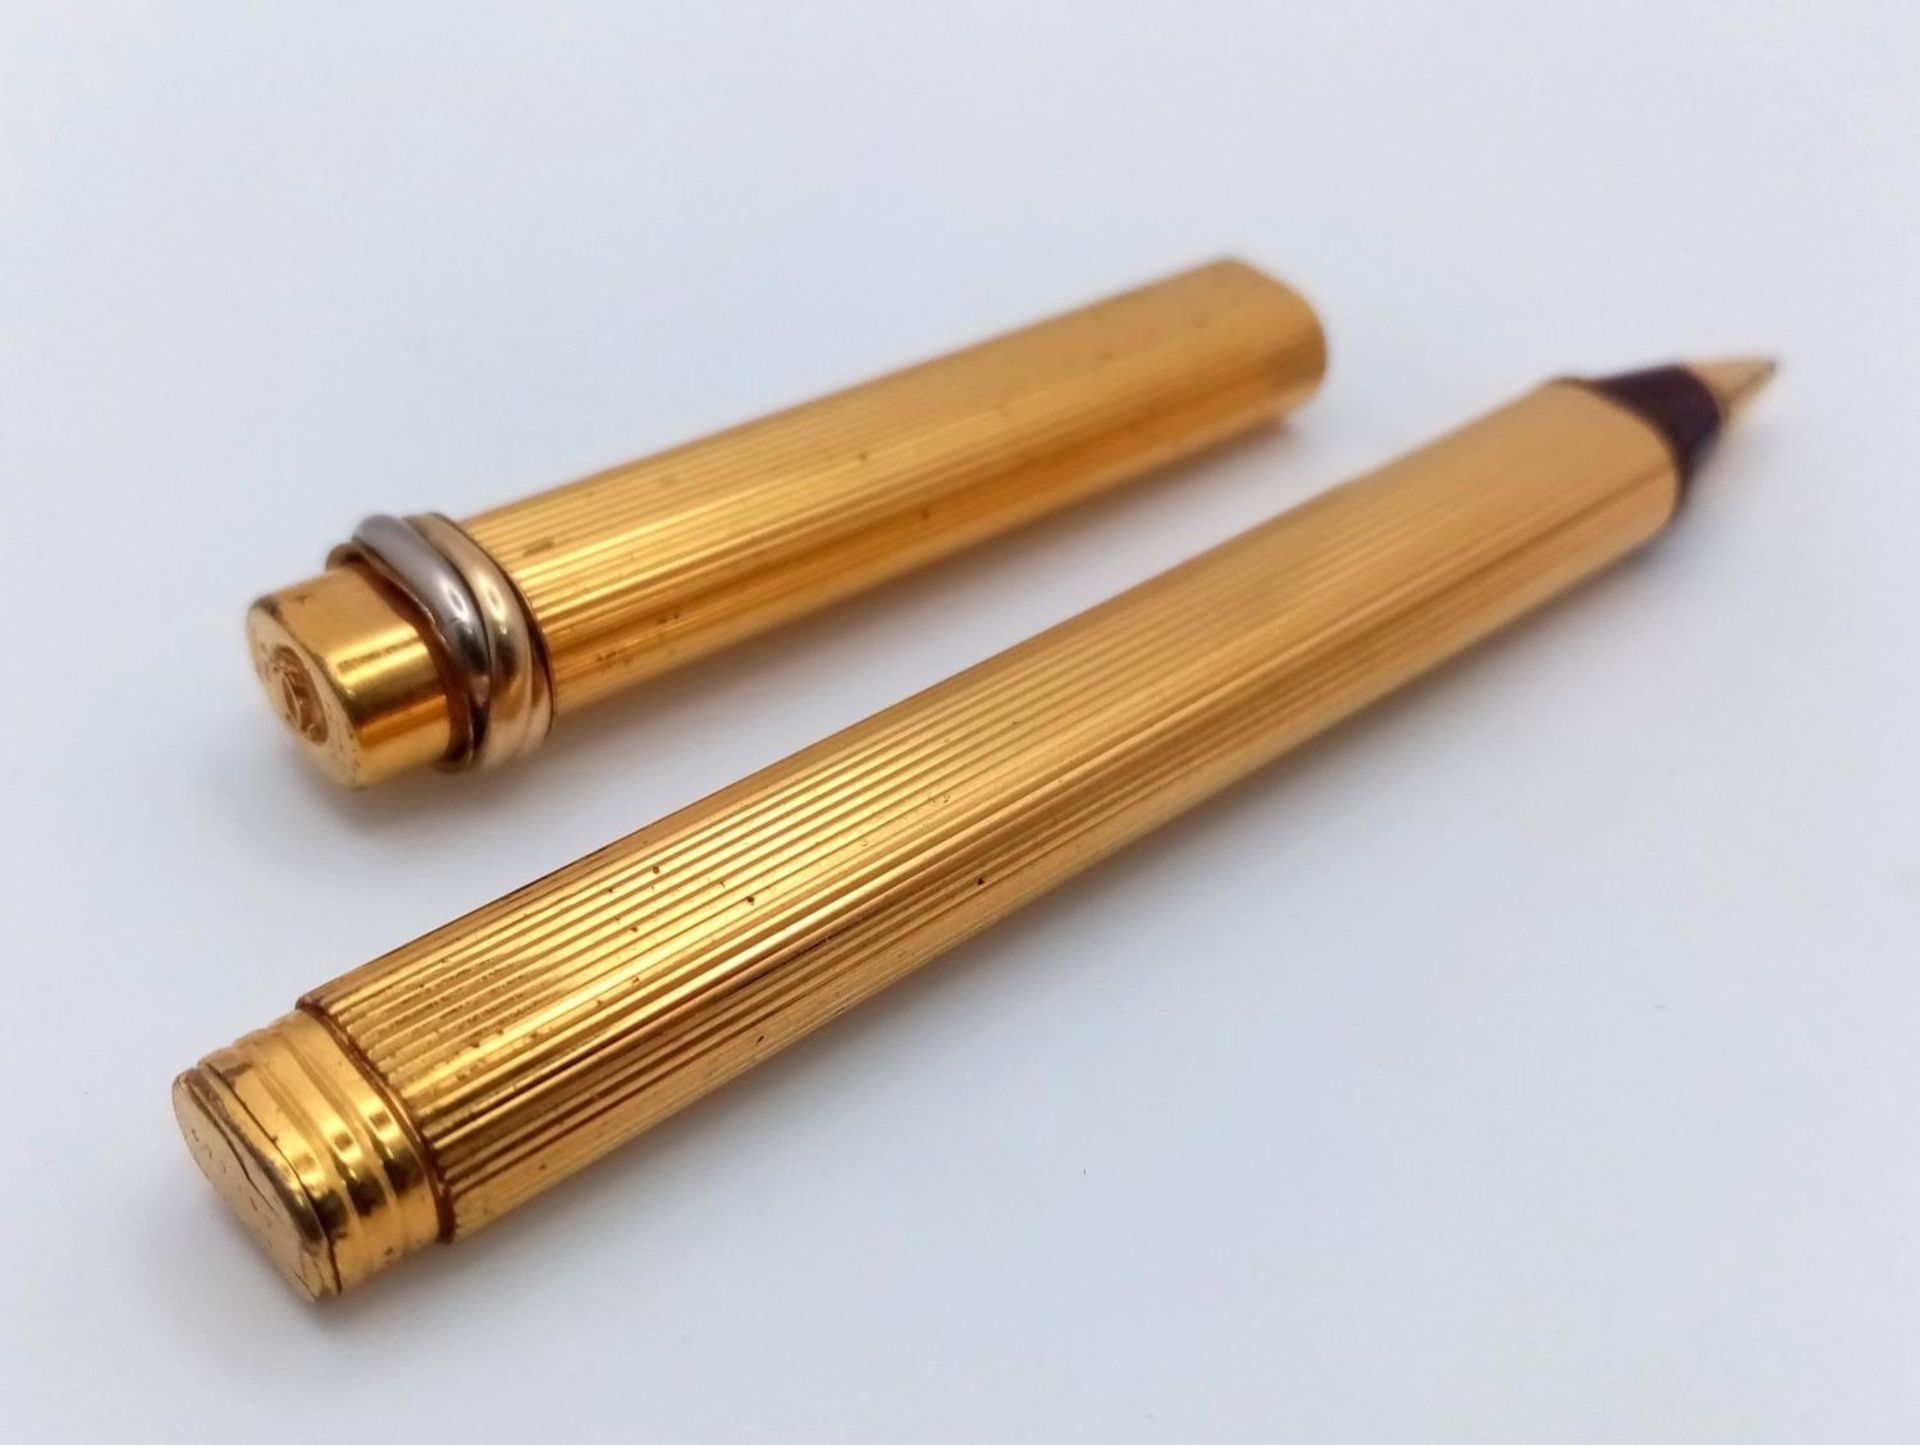 A CARTIER gold plated pen, length: 13. 7 cm, weight: 23.2 g. Ref: 17183 - Image 2 of 6